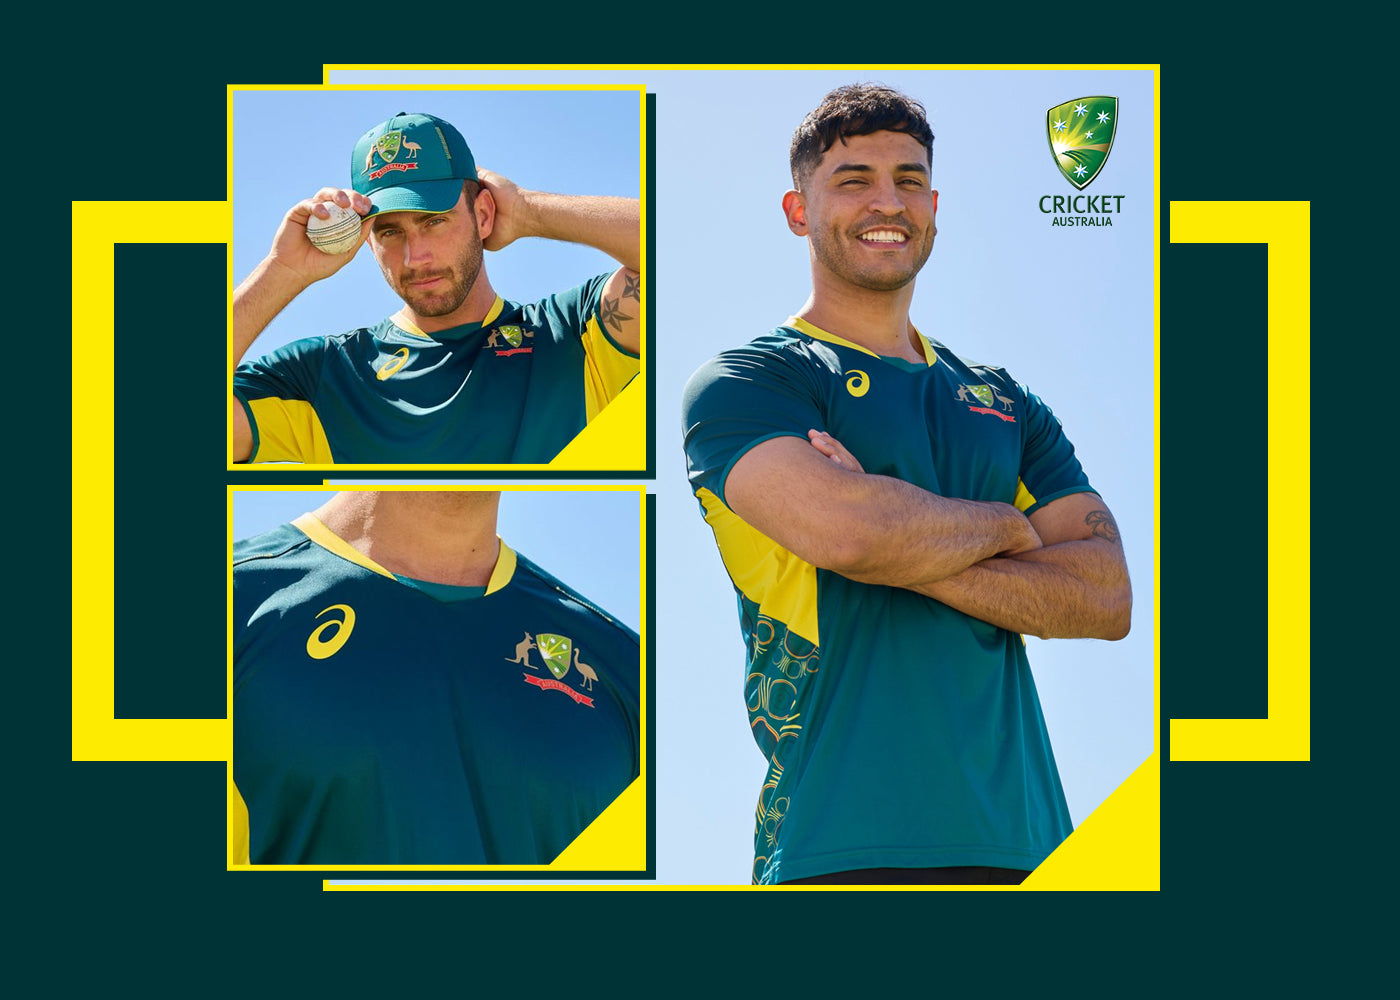 Cheer on Australia in the ICC Men's T20 World Cup with our range of Cricket Australia Supporter Gear.